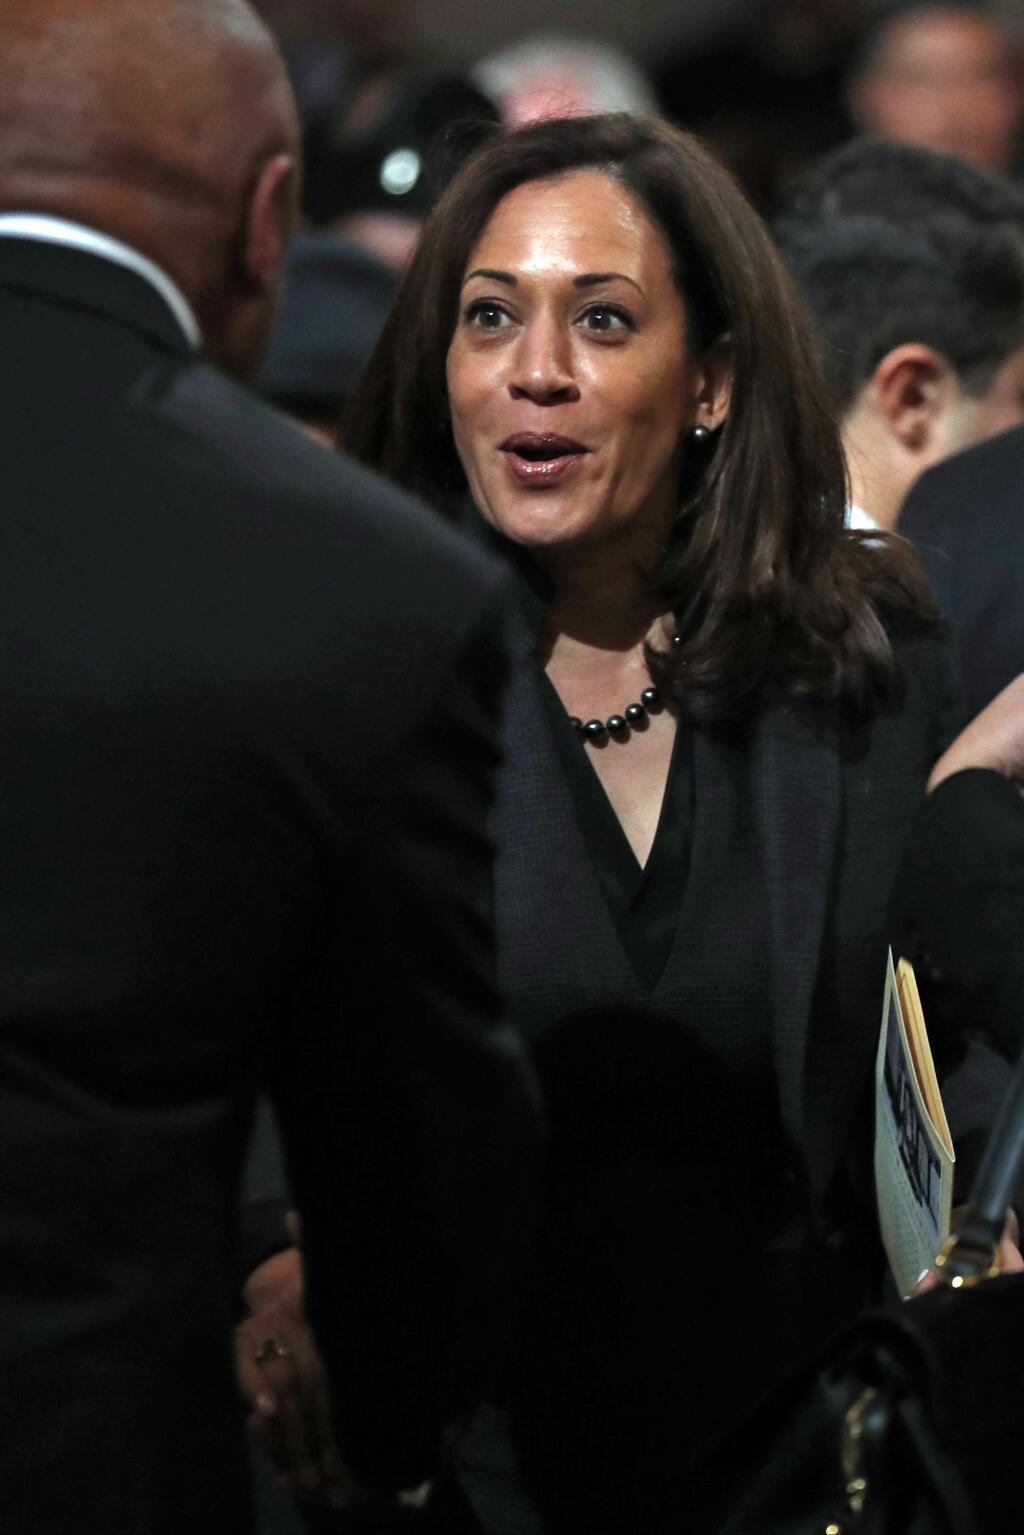 Sen. Kamala Harris, right, greets former San Francisco Mayor Willie Brown after a service celebrating the life of Mayor Ed Lee at San Francisco City Hall in San Francisco, Sunday, Dec. 17, 2017. San Francisco Mayor Ed Lee was remembered for his humility, integrity and infectious smile during a public celebration of his life Sunday at City Hall attended by family members, former staff, politicians and residents. (Scott Strazzante/San Francisco Chronicle via AP, Pool)